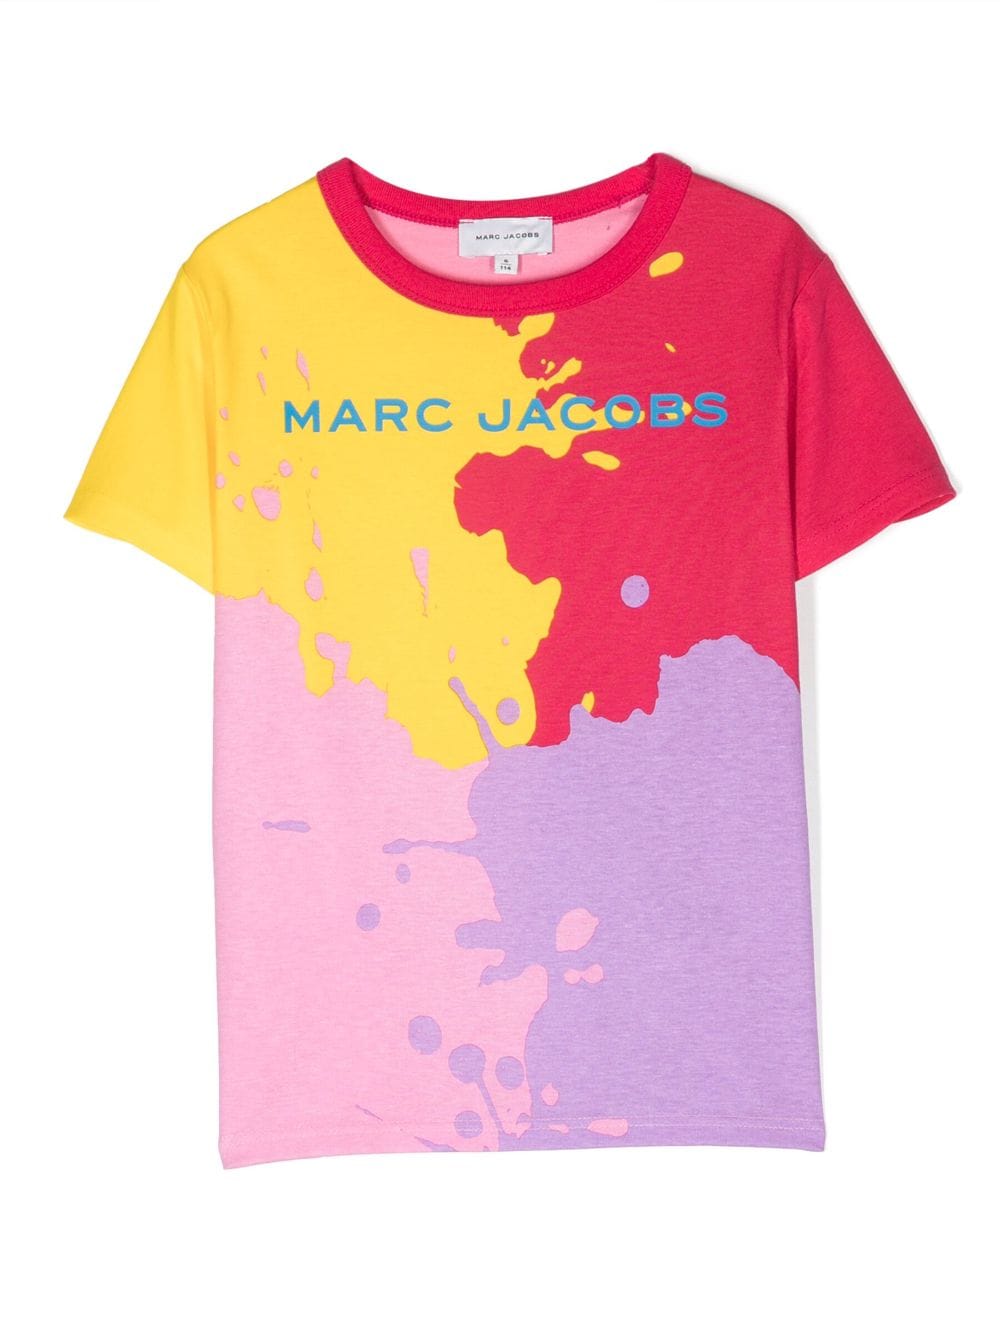 Marc Jacobs Kids' 拼色泼漆效果印花t恤 In Multicolor